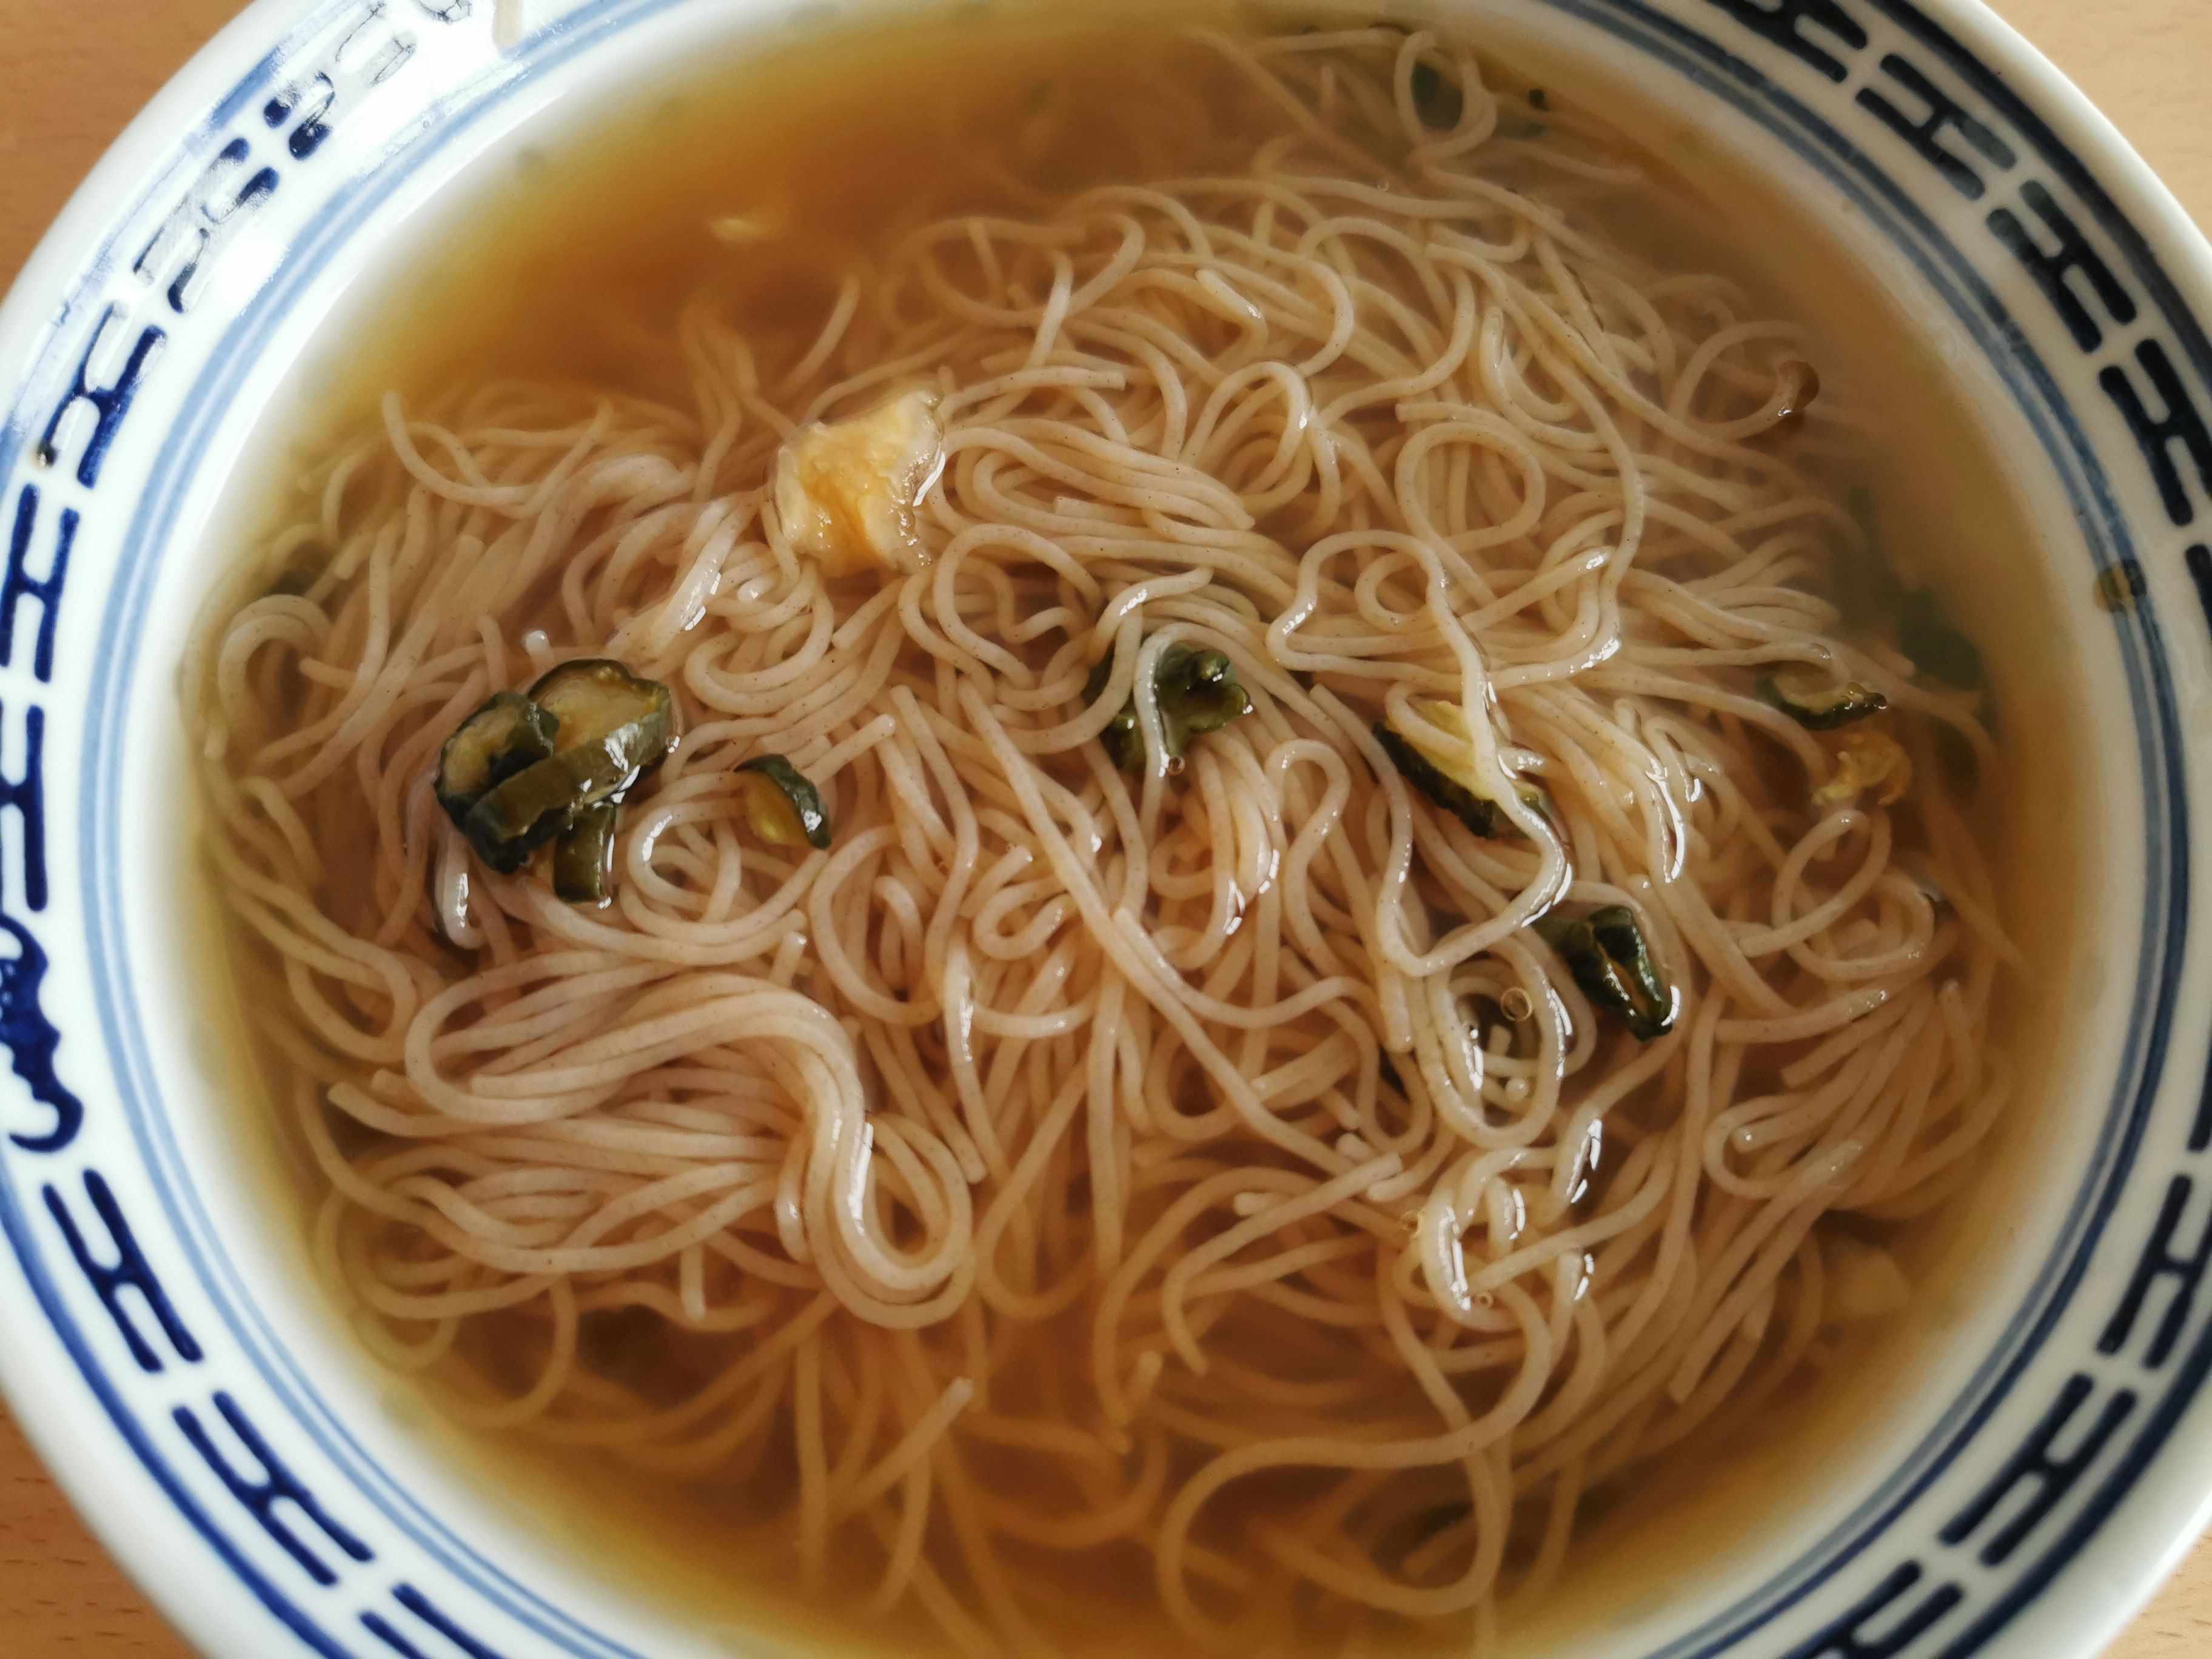 #2333: Nongshim "Doong Ji Cold Noodles in Chilled Broth (2022)"